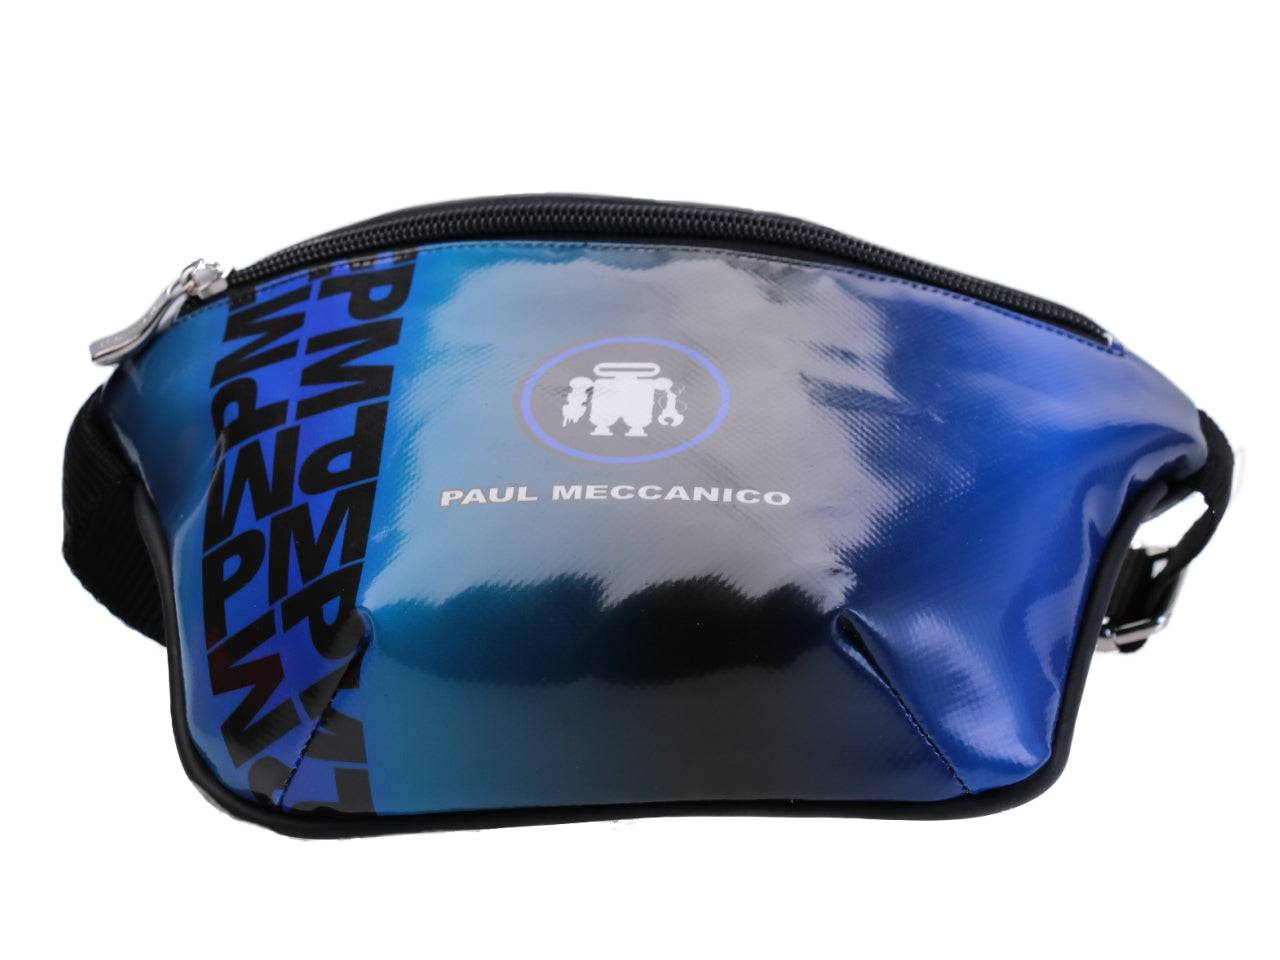 BLUE AND LIGHT BLUE WAIST BAG WITH SHADED FANTASY. MODEL FLEX MADE OF LORRY TARPAULIN. - Limited Edition Paul Meccanico